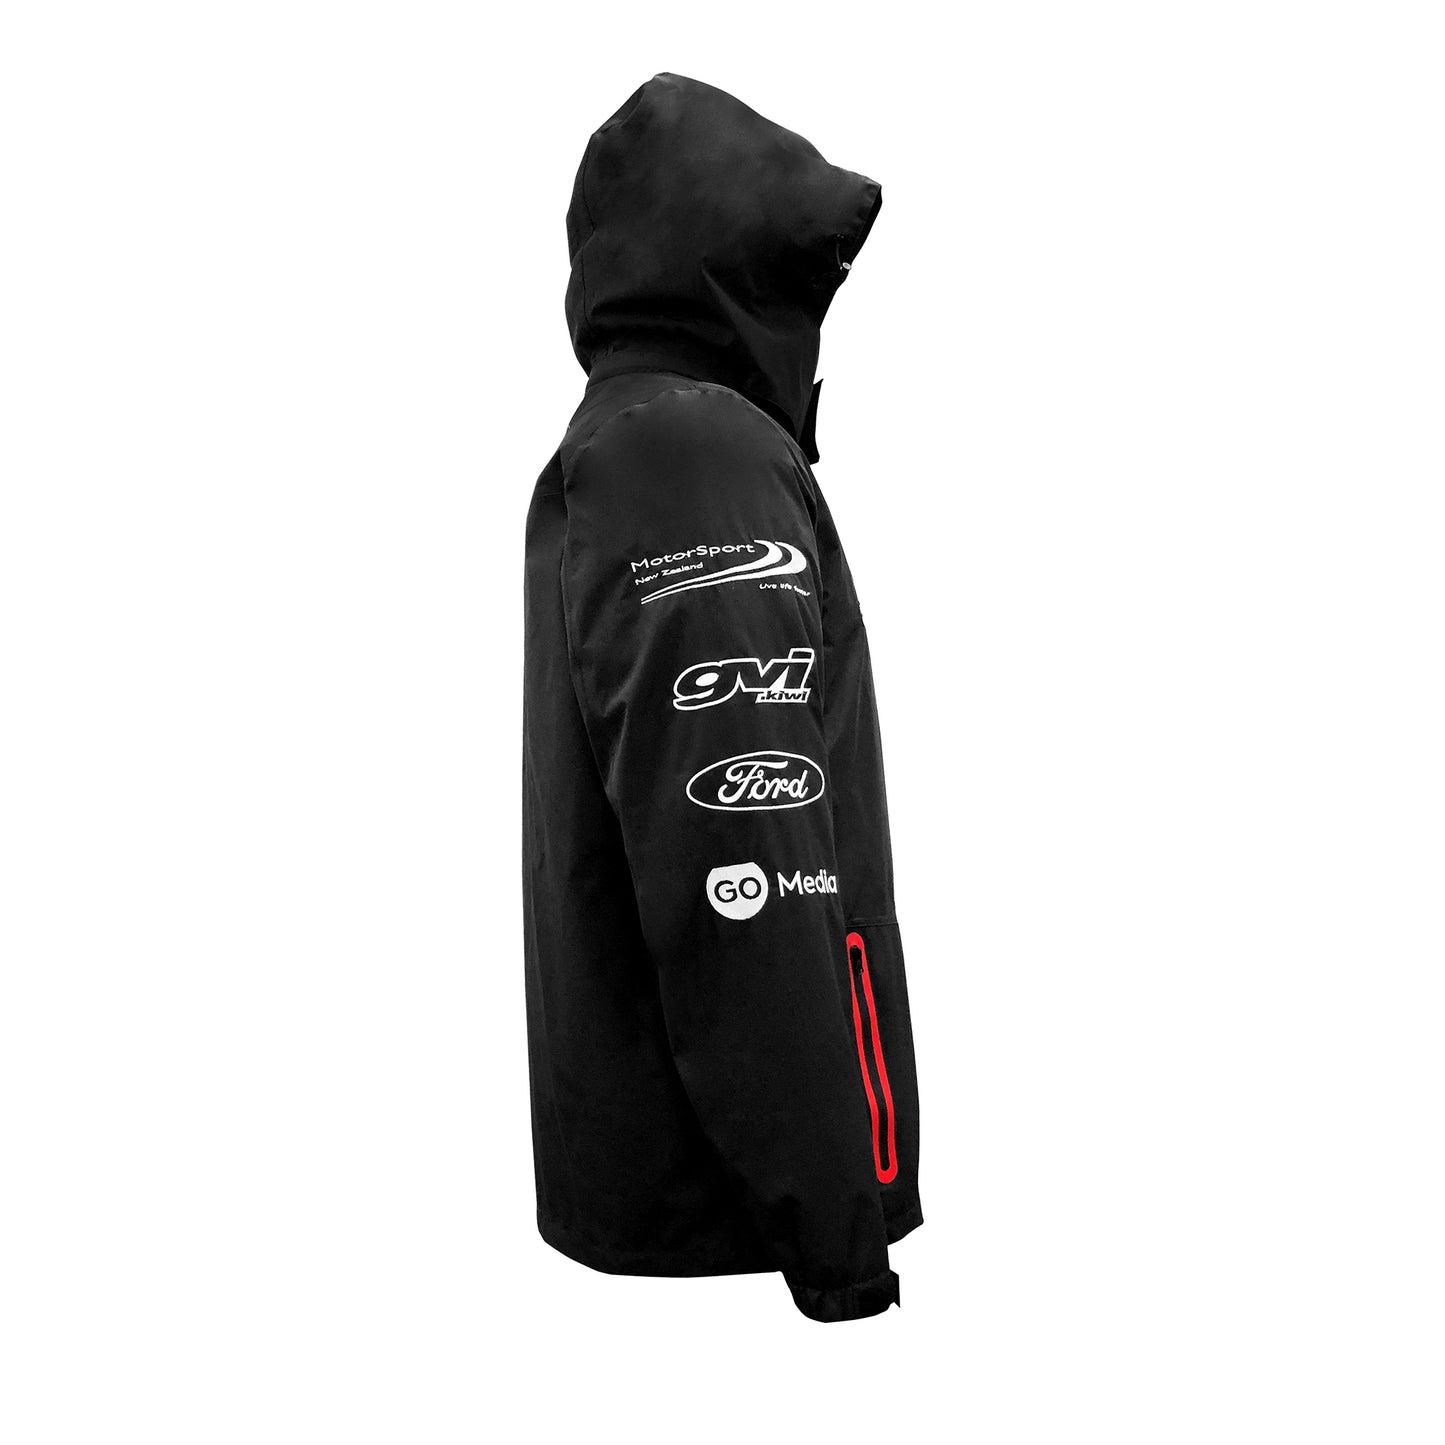 Repco Rally of New Zealand Shakedown Jacket  - Price Reduction $99 while stocks lasts